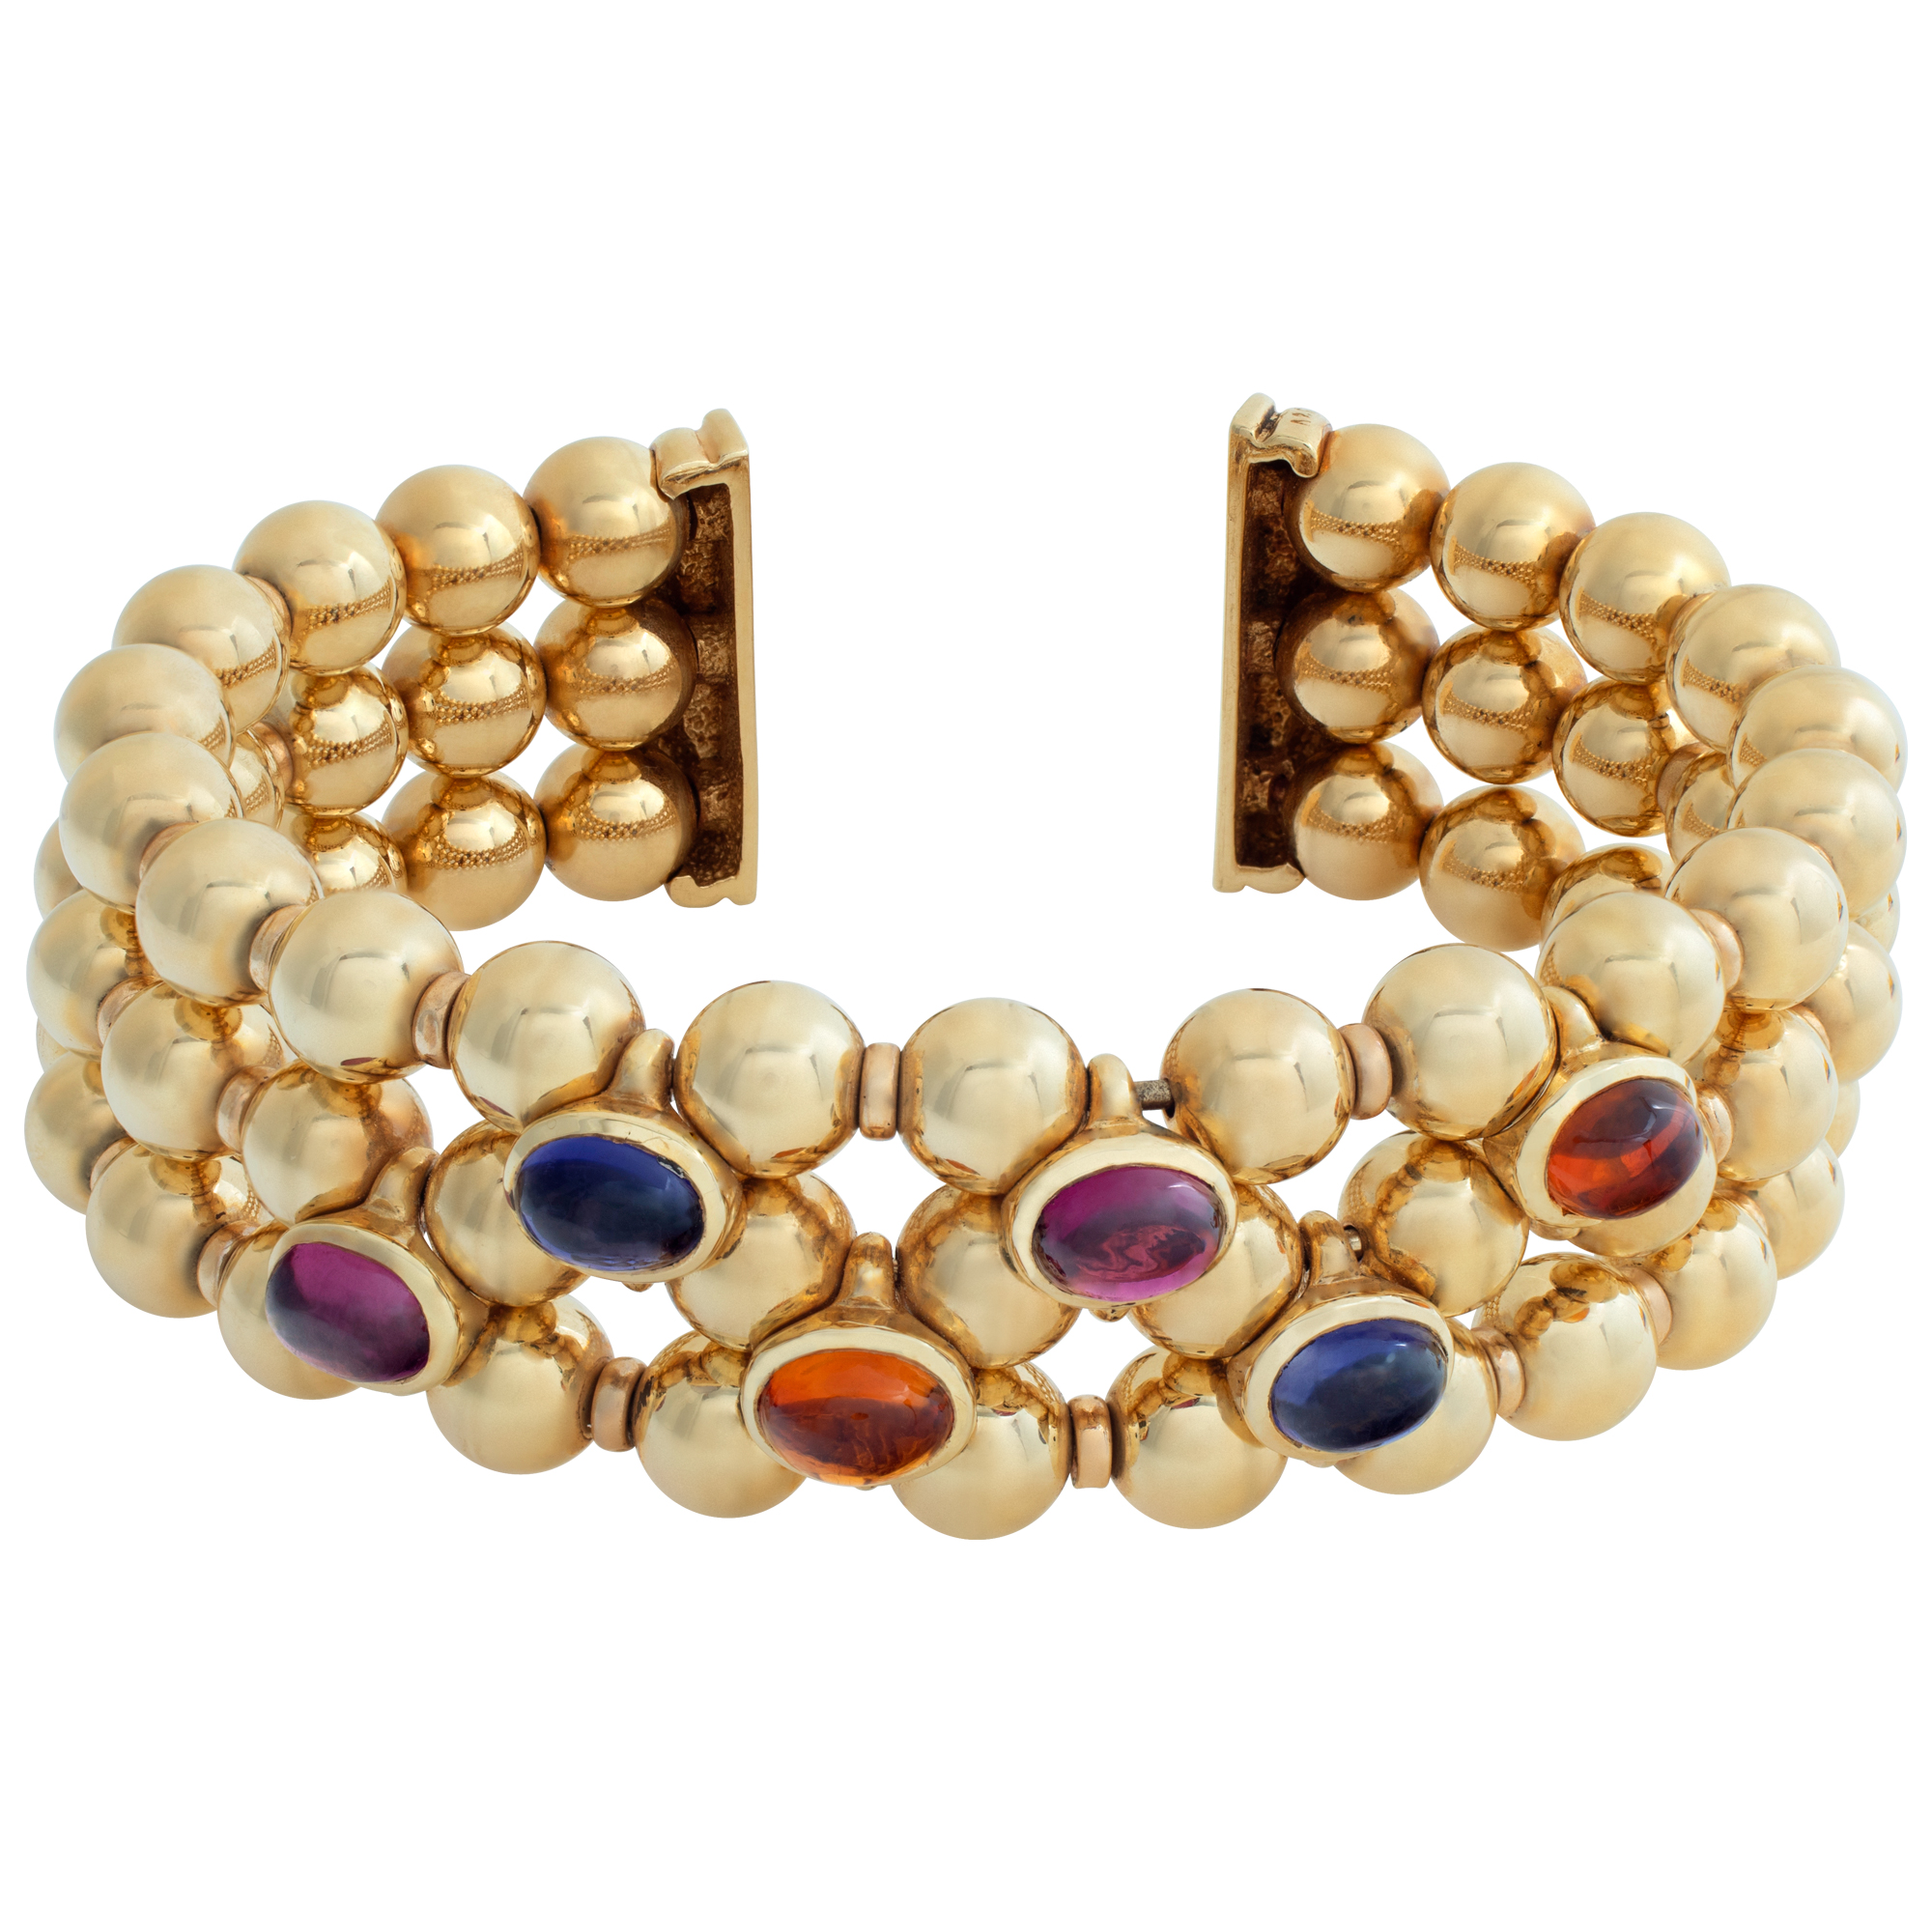 Gold bead flexible cuff with colored cabochon stones in 14k yellow gold